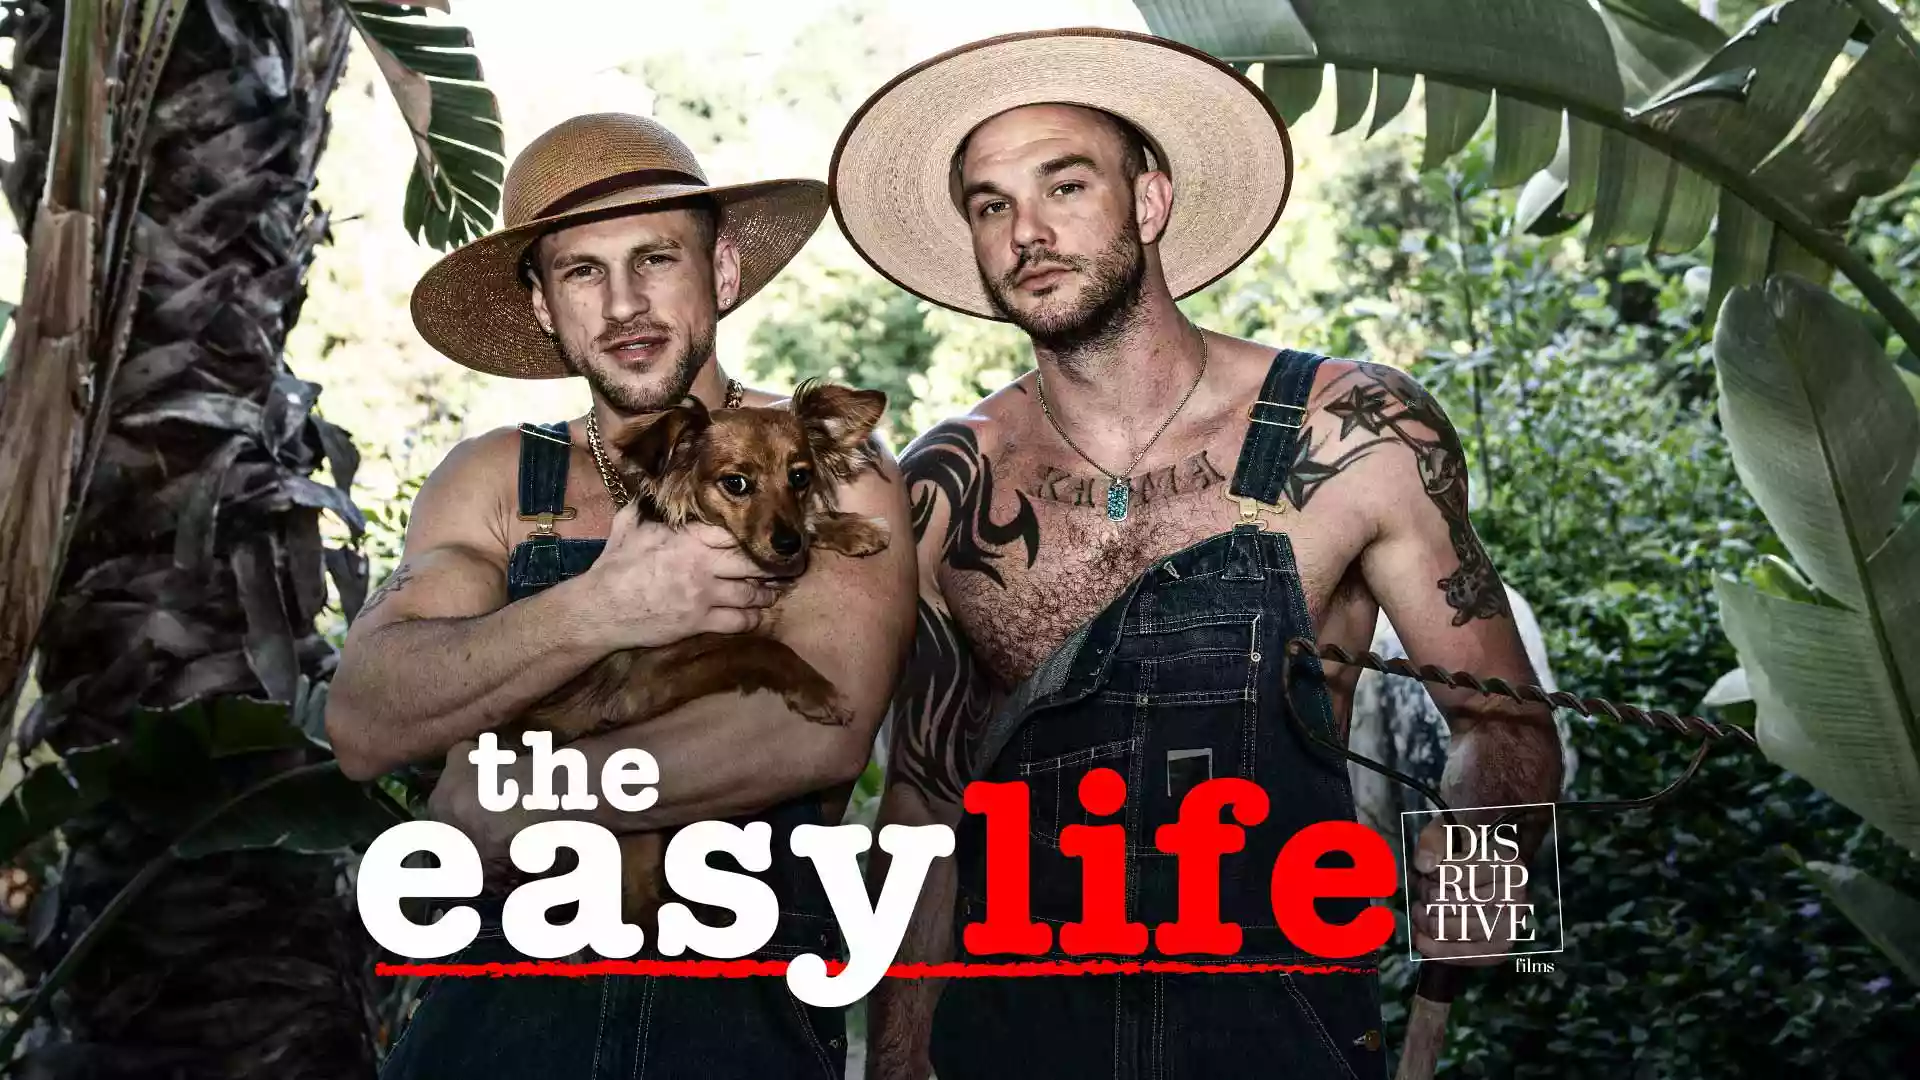 The Easy Life – Roman Todd and Cliff Jensen